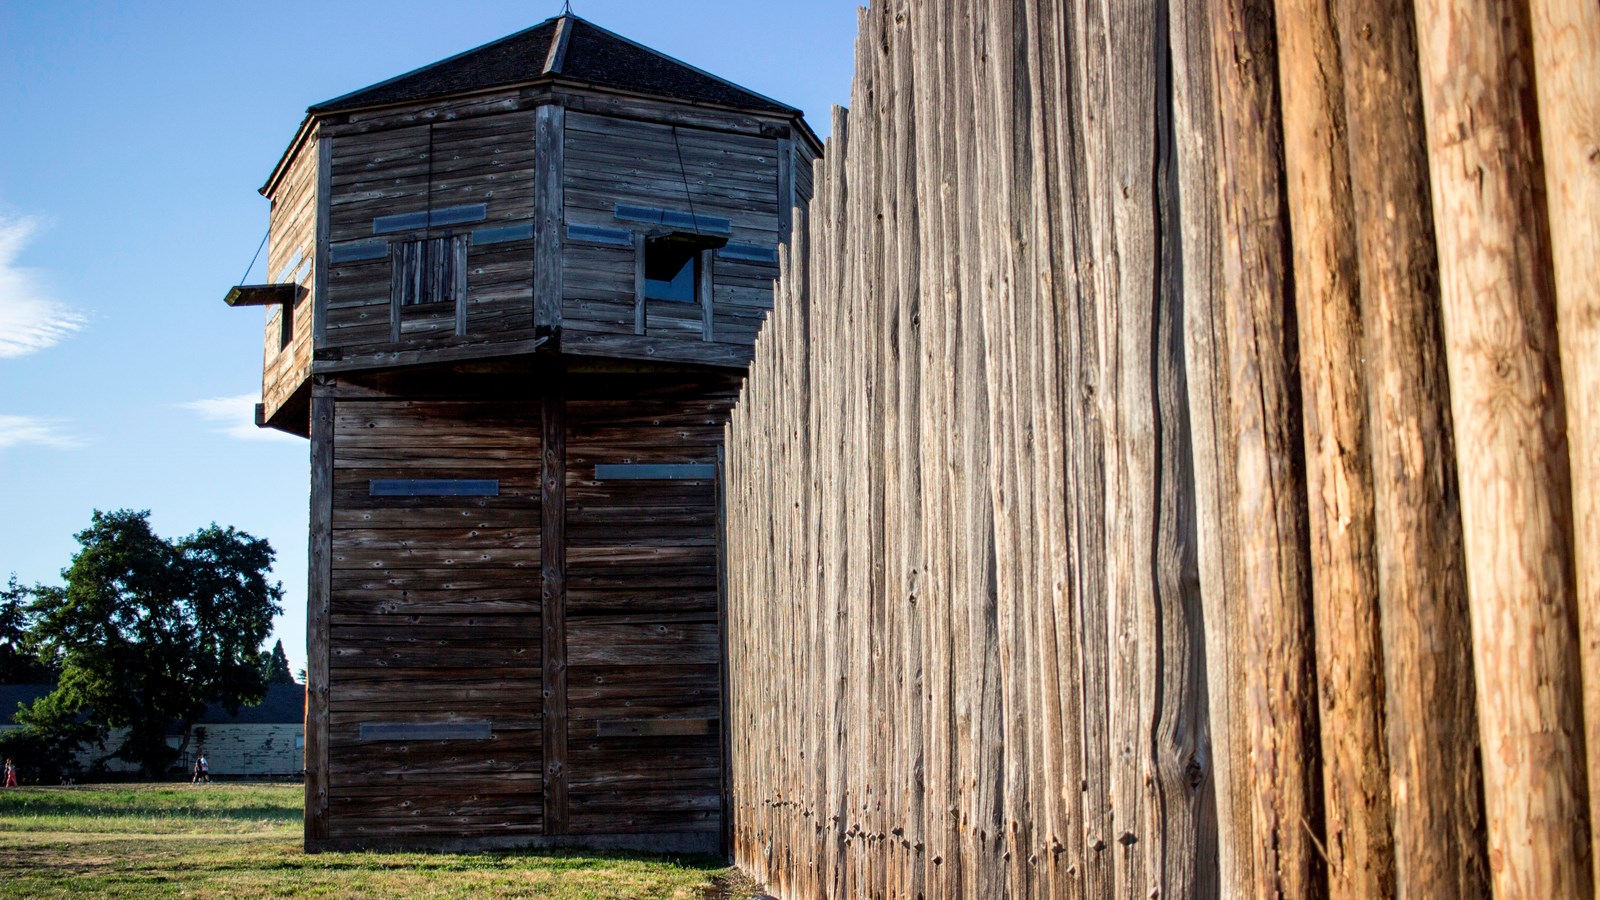 The wooden stockade wall and bastion.